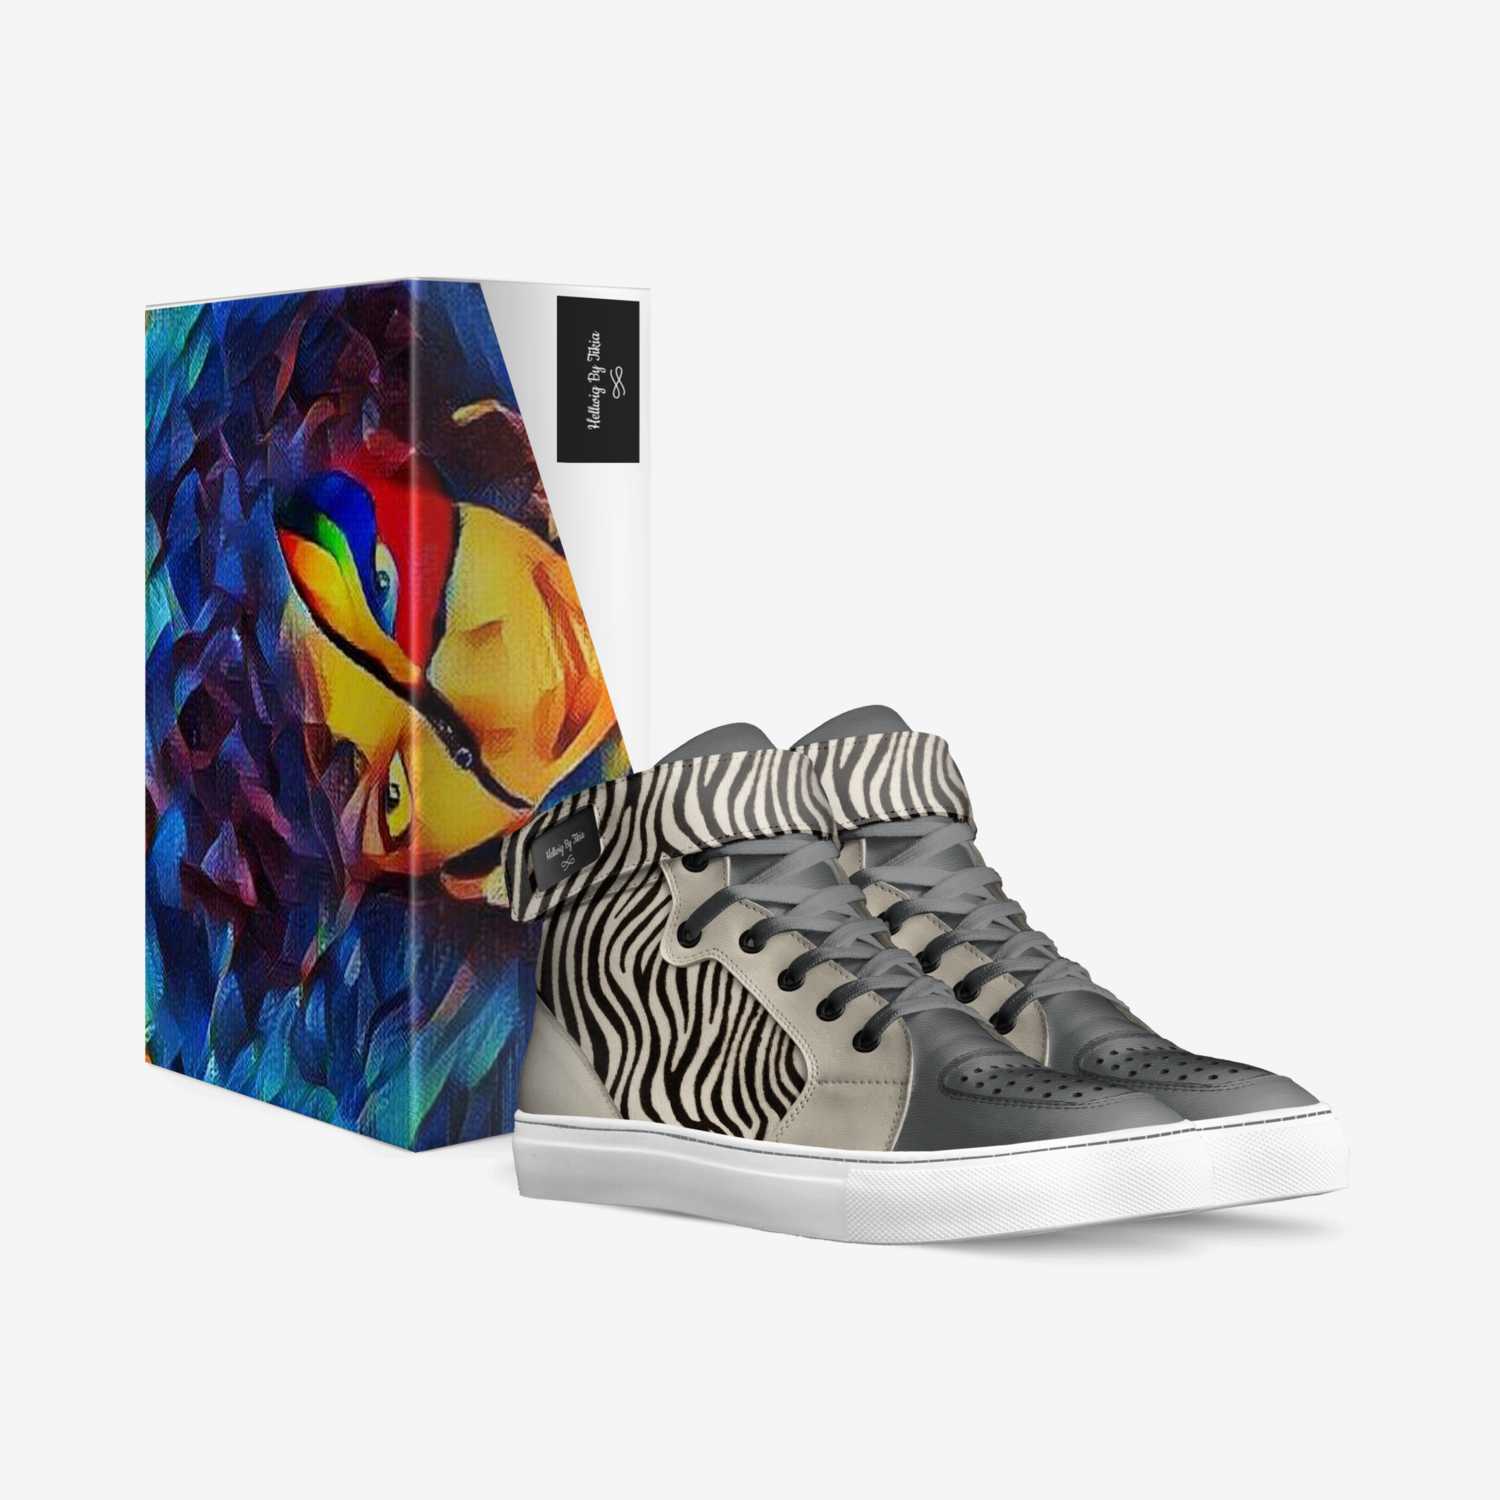 African Zebra Sr. custom made in Italy shoes by Tikia Hellwig | Box view